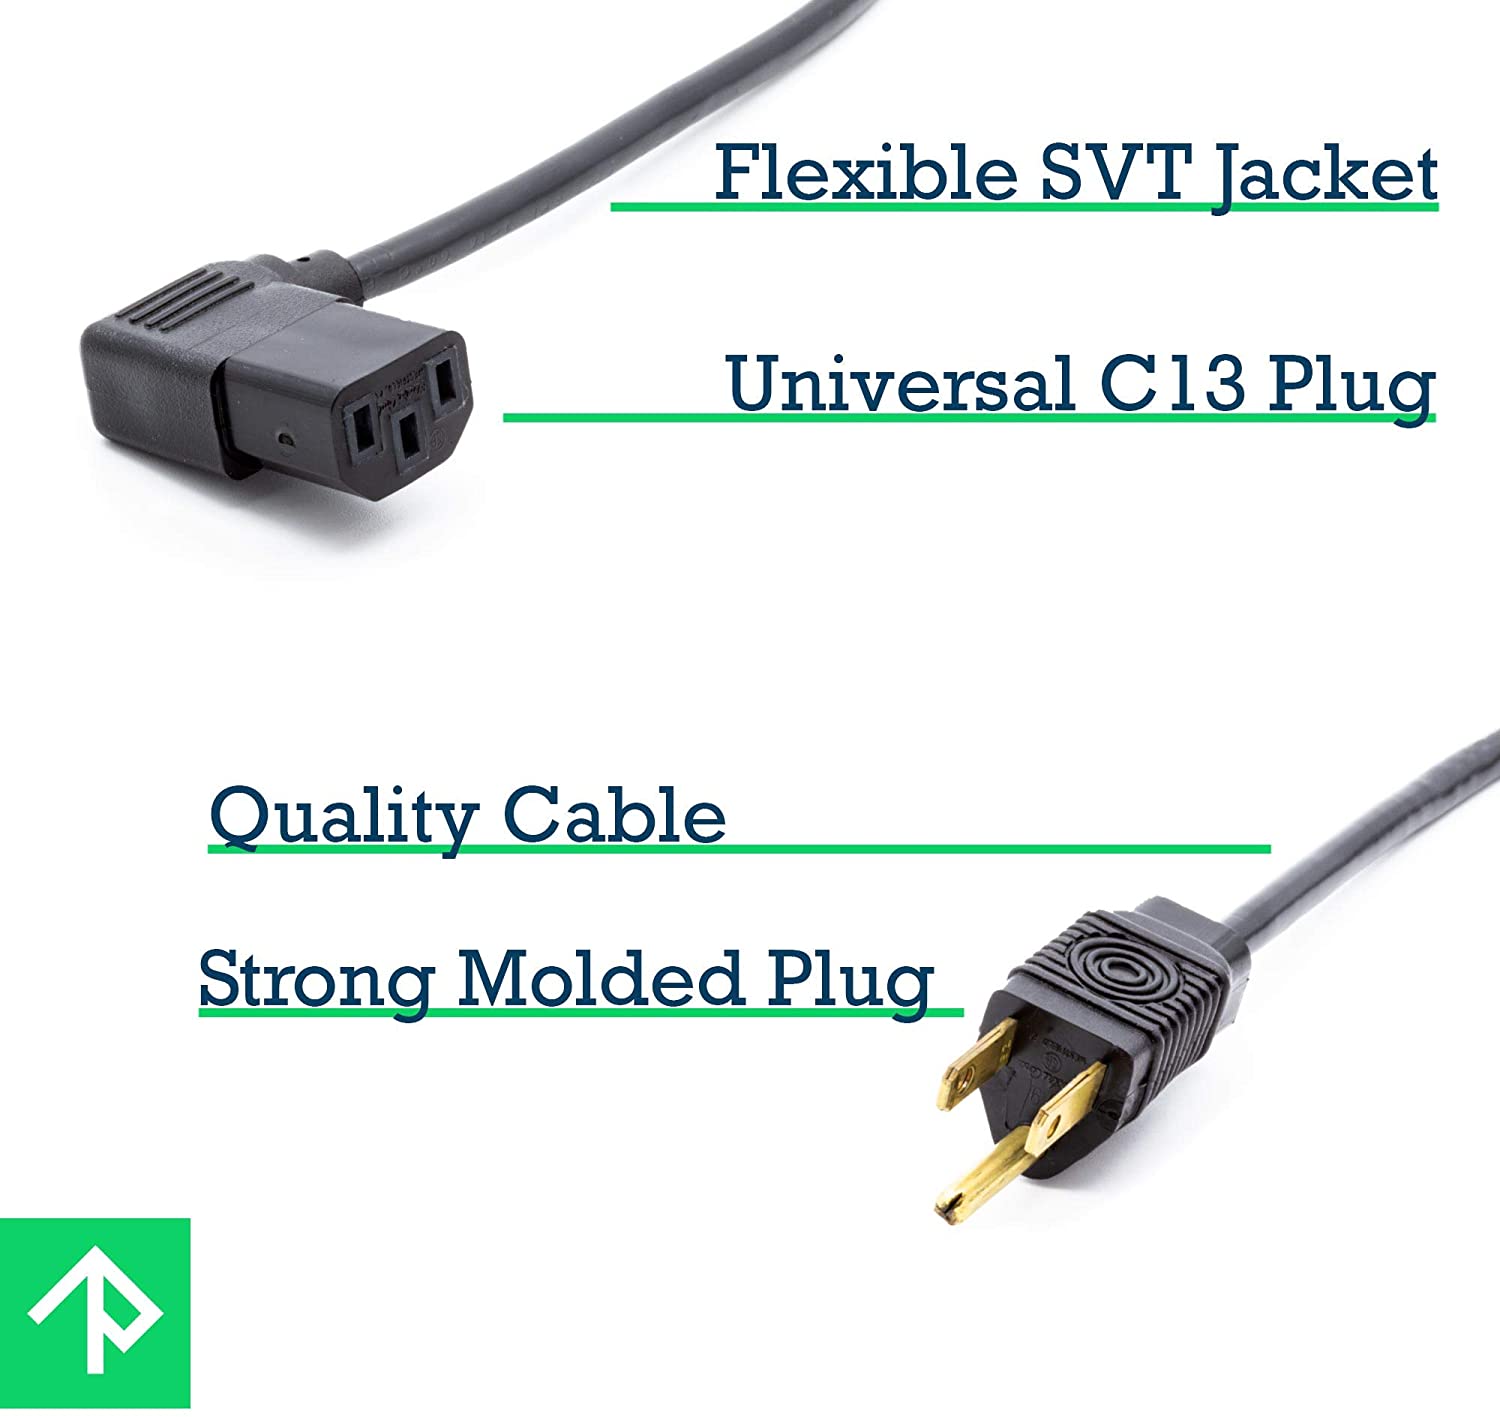 UL Approved 6 Feet Universal Computer Monitor Power Cord, Right Angle C13 Power Cable  - 5 Pack!